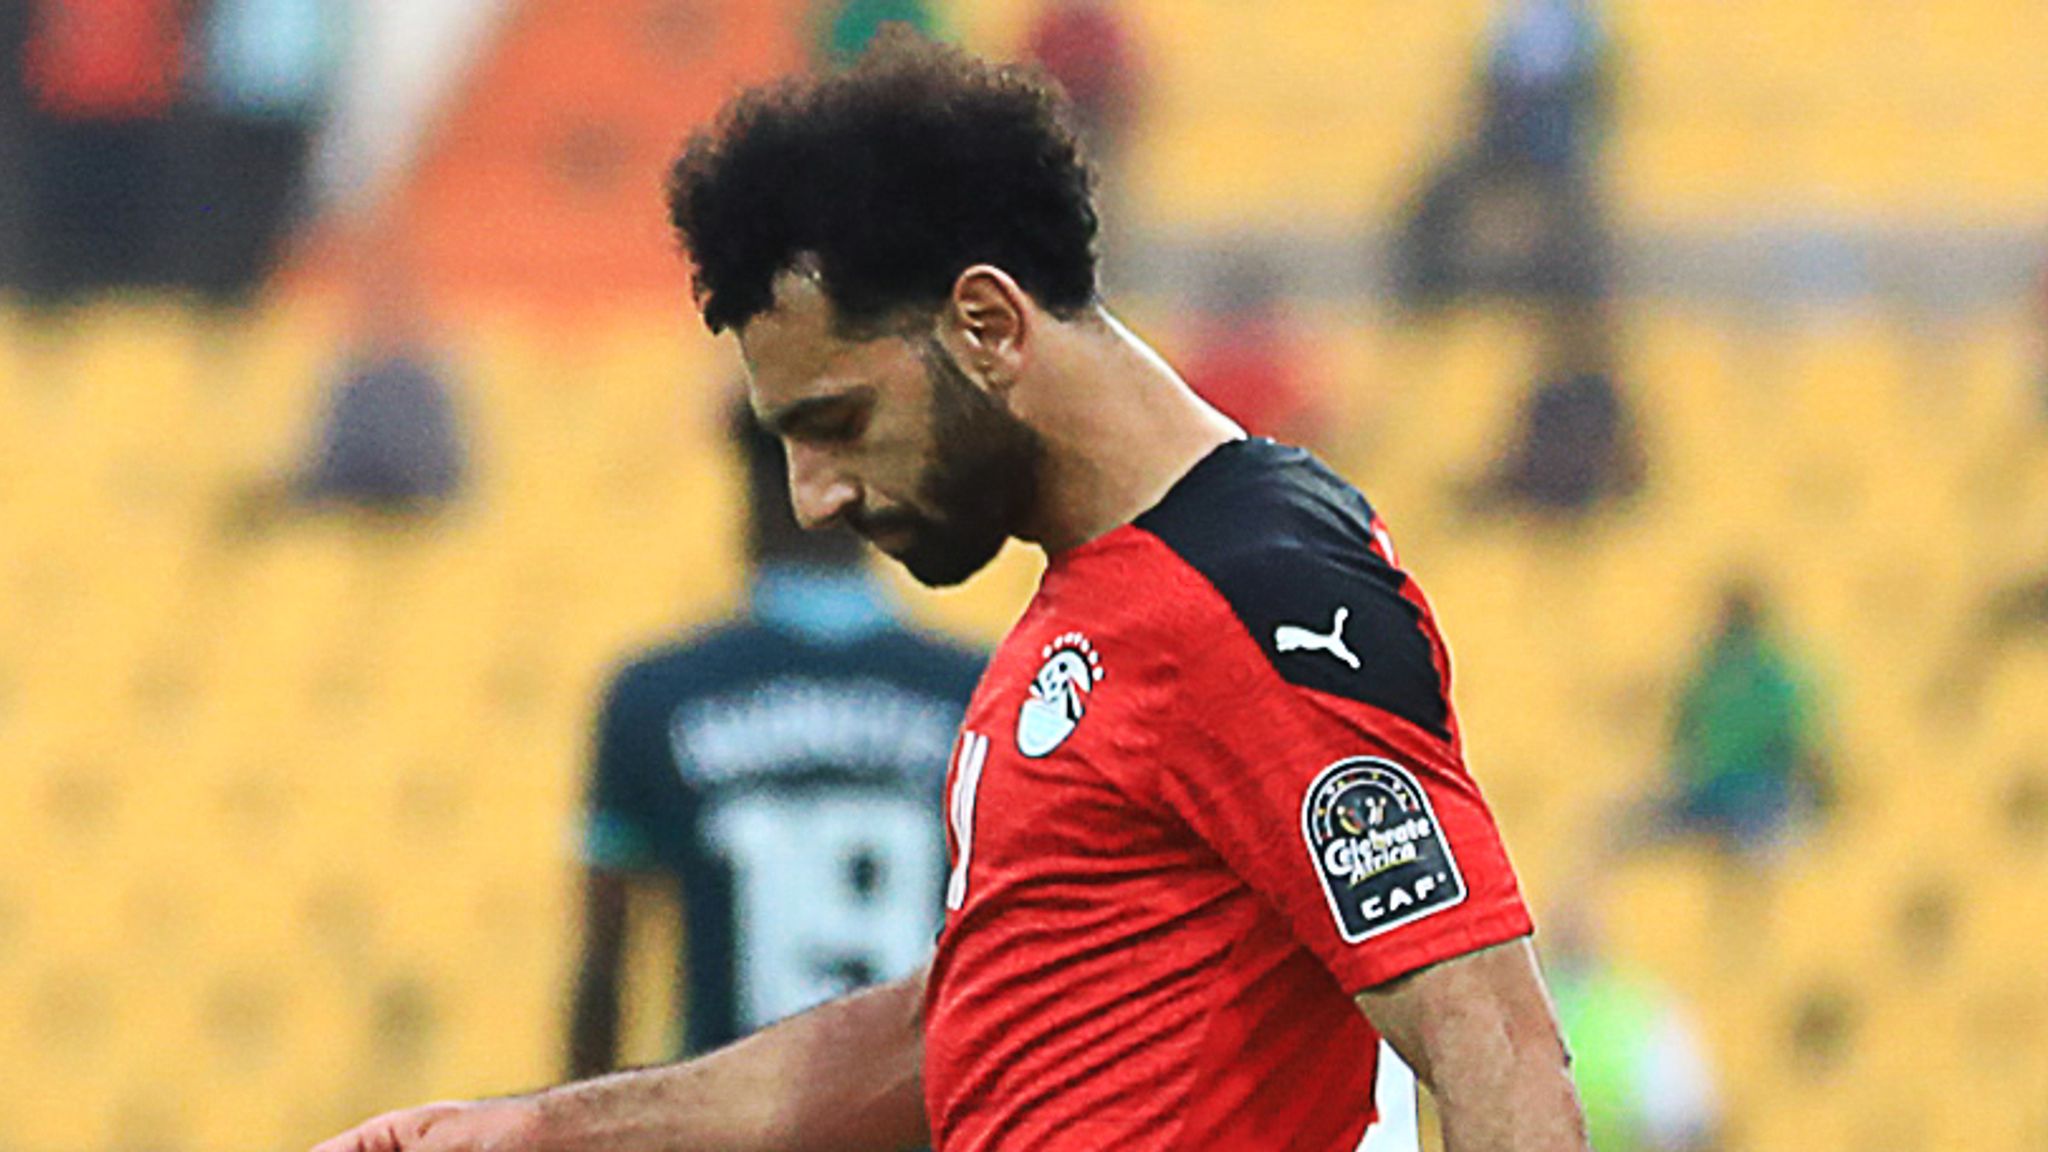 Liverpool star Mohamed Salah had a day to forget as Egypt lose their Afcon 2021 opener to the Super Eagles of Nigeria on Monday night